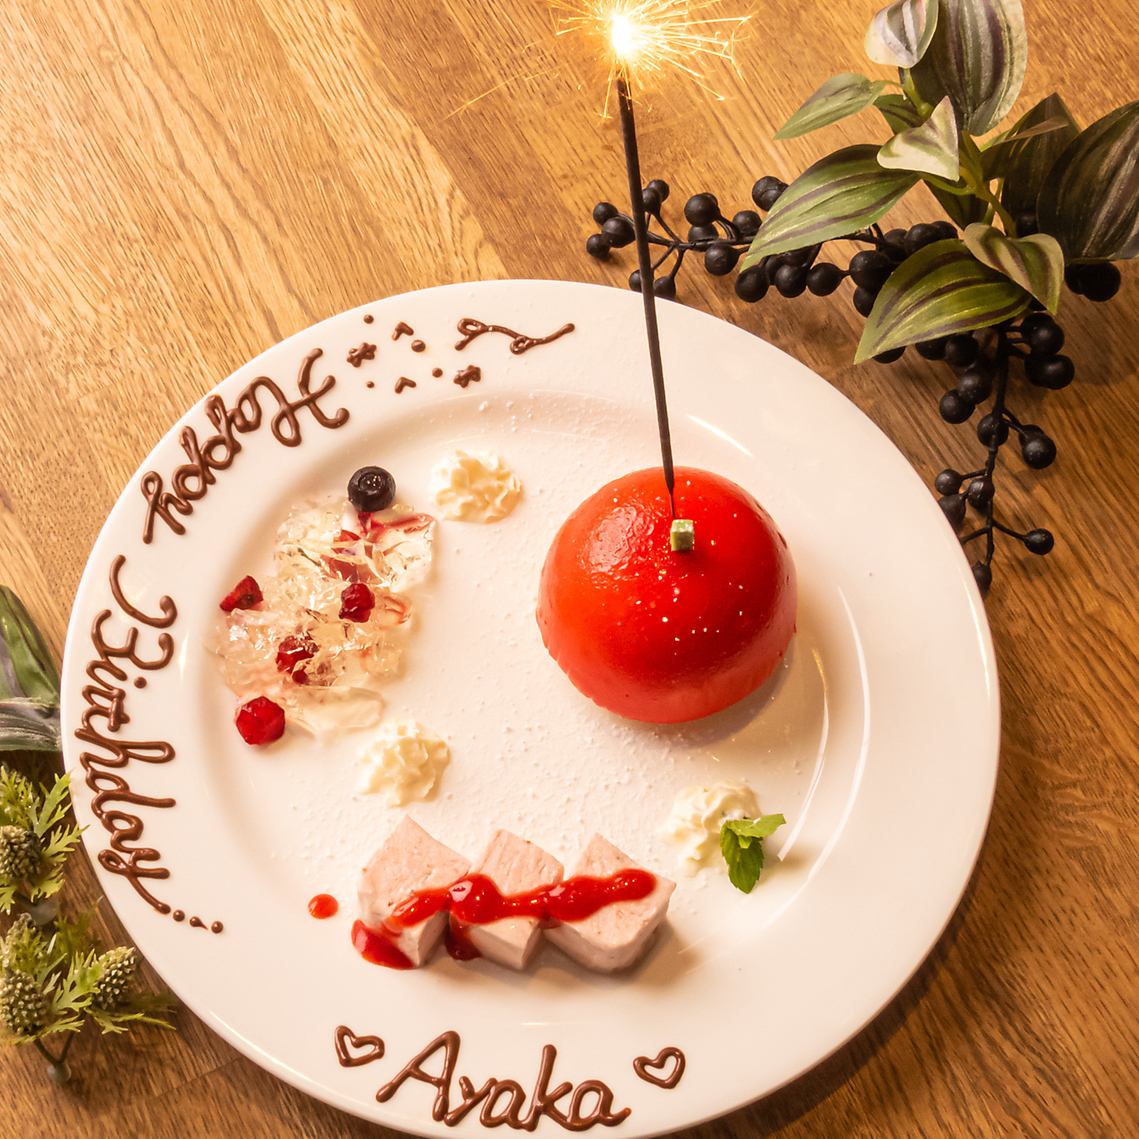 Perfect for birthdays and anniversaries! We offer plates with special messages♪